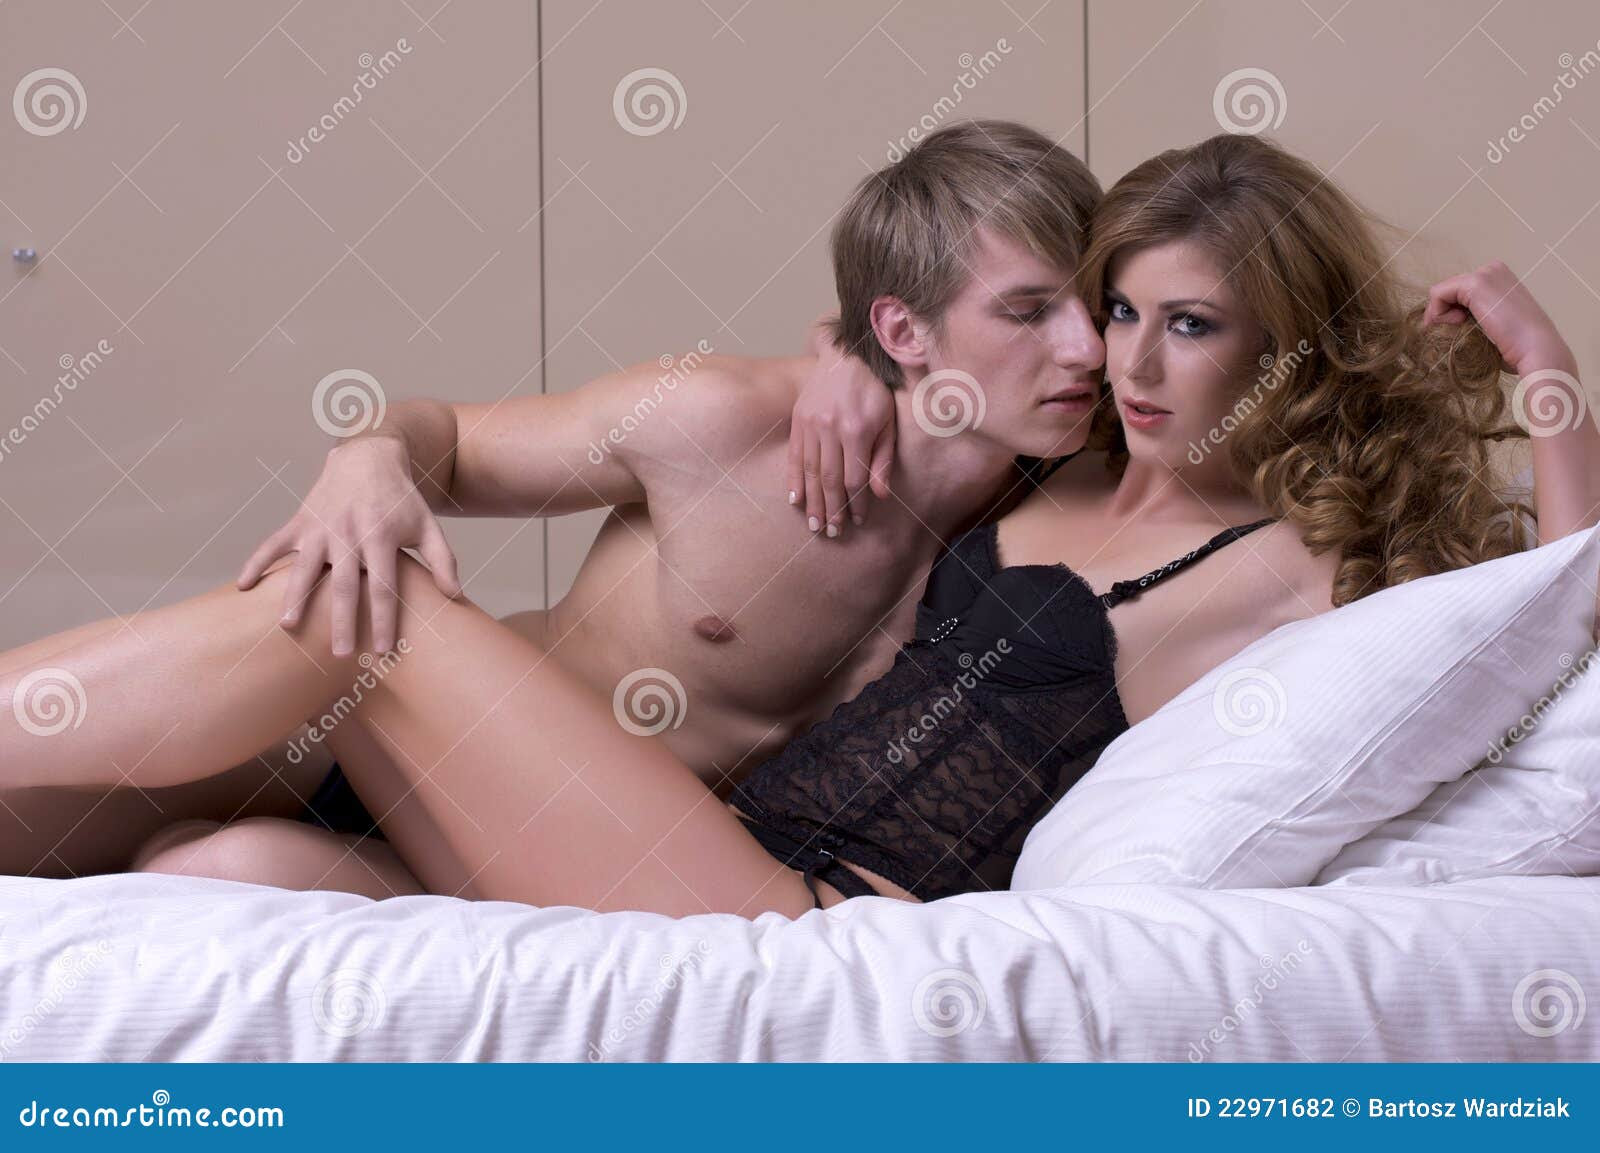 Intimate young couple during